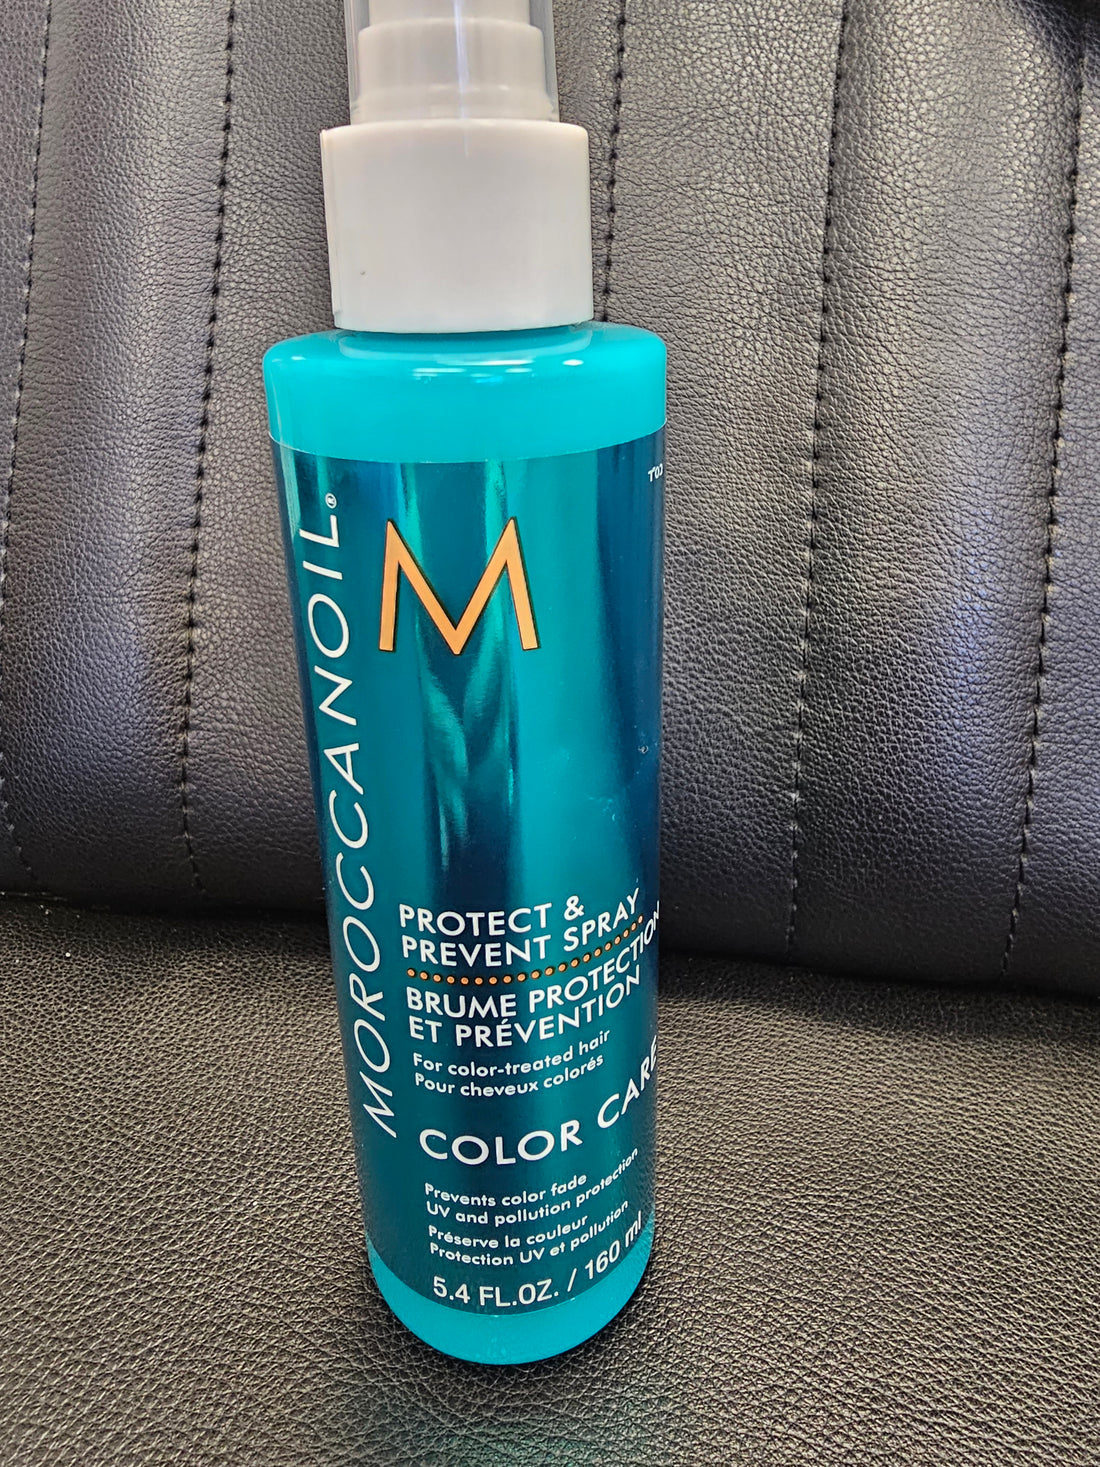 Moroccanoil Protect and Prevent spray